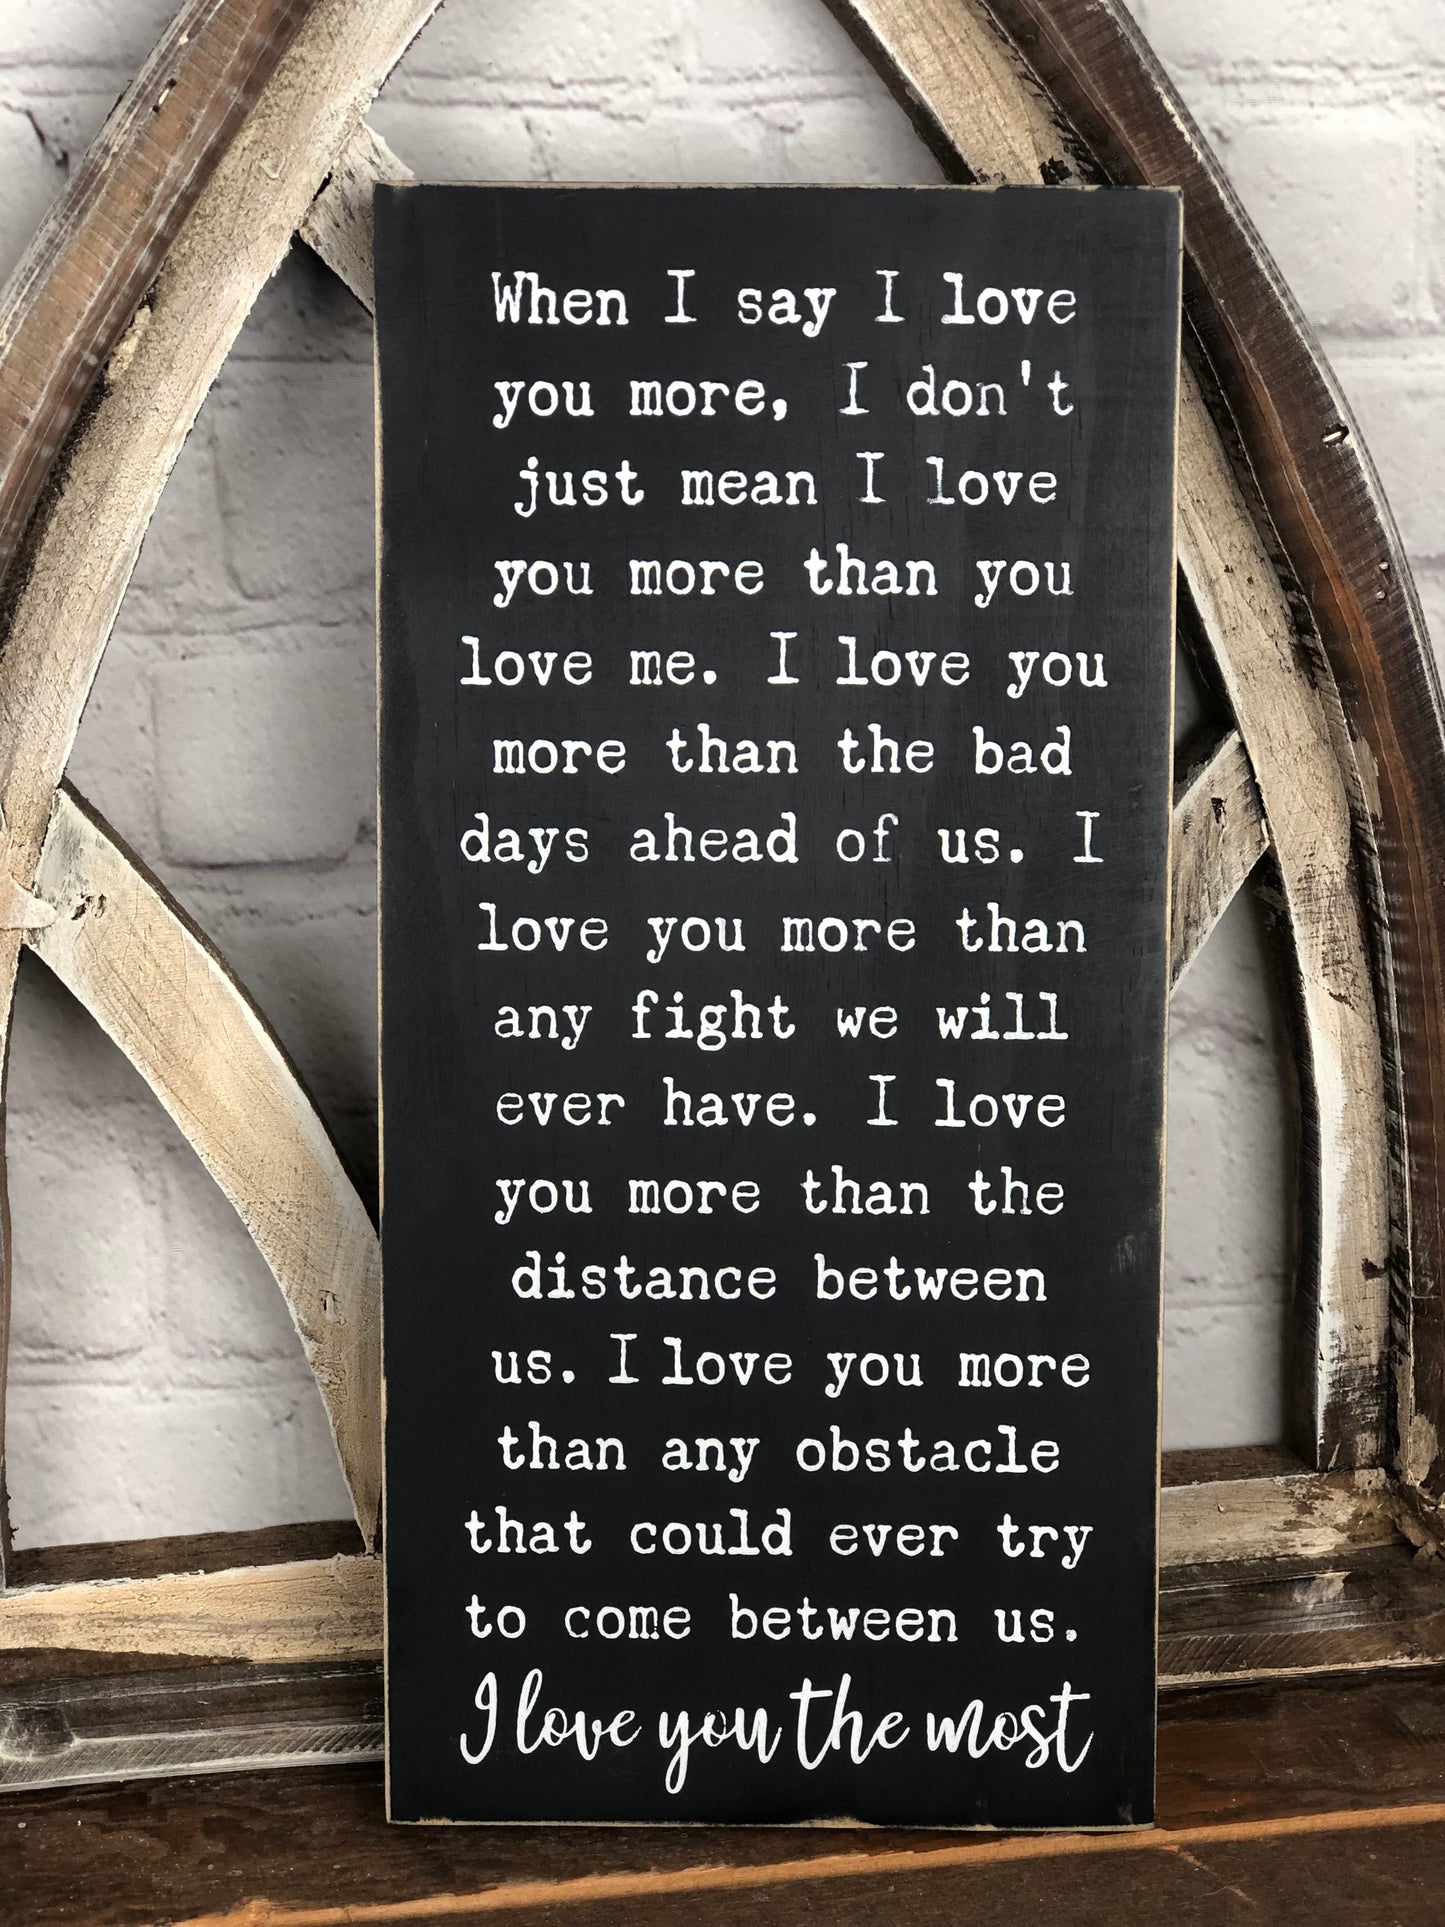 I LOVE YOU THE MOST- WOOD SIGN